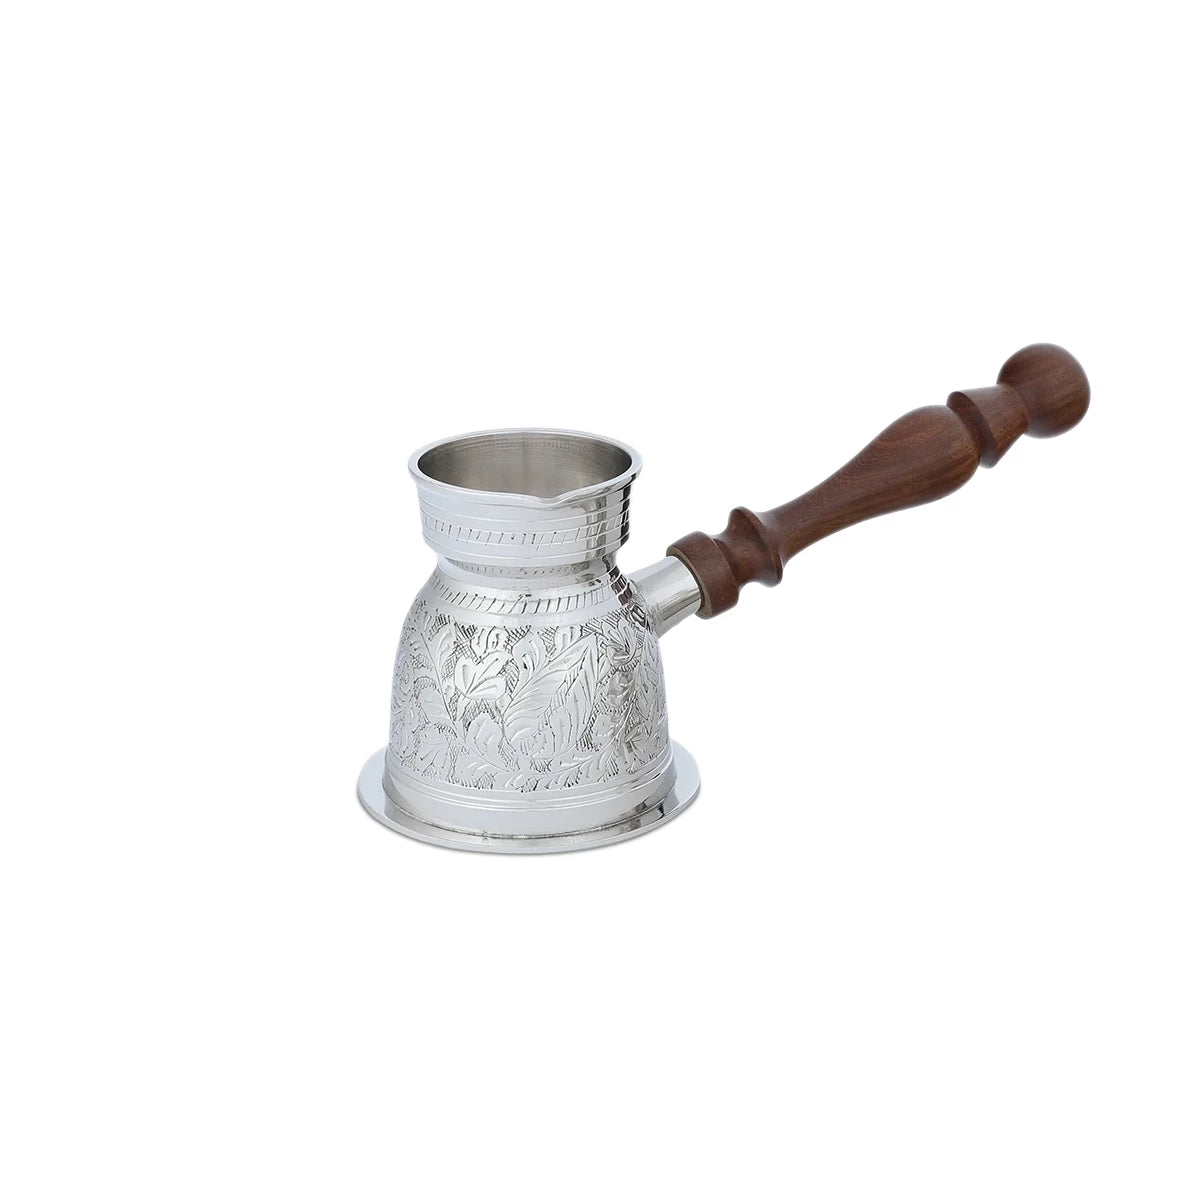 Front View of Turkish Coffee Pots - Silver, Medium